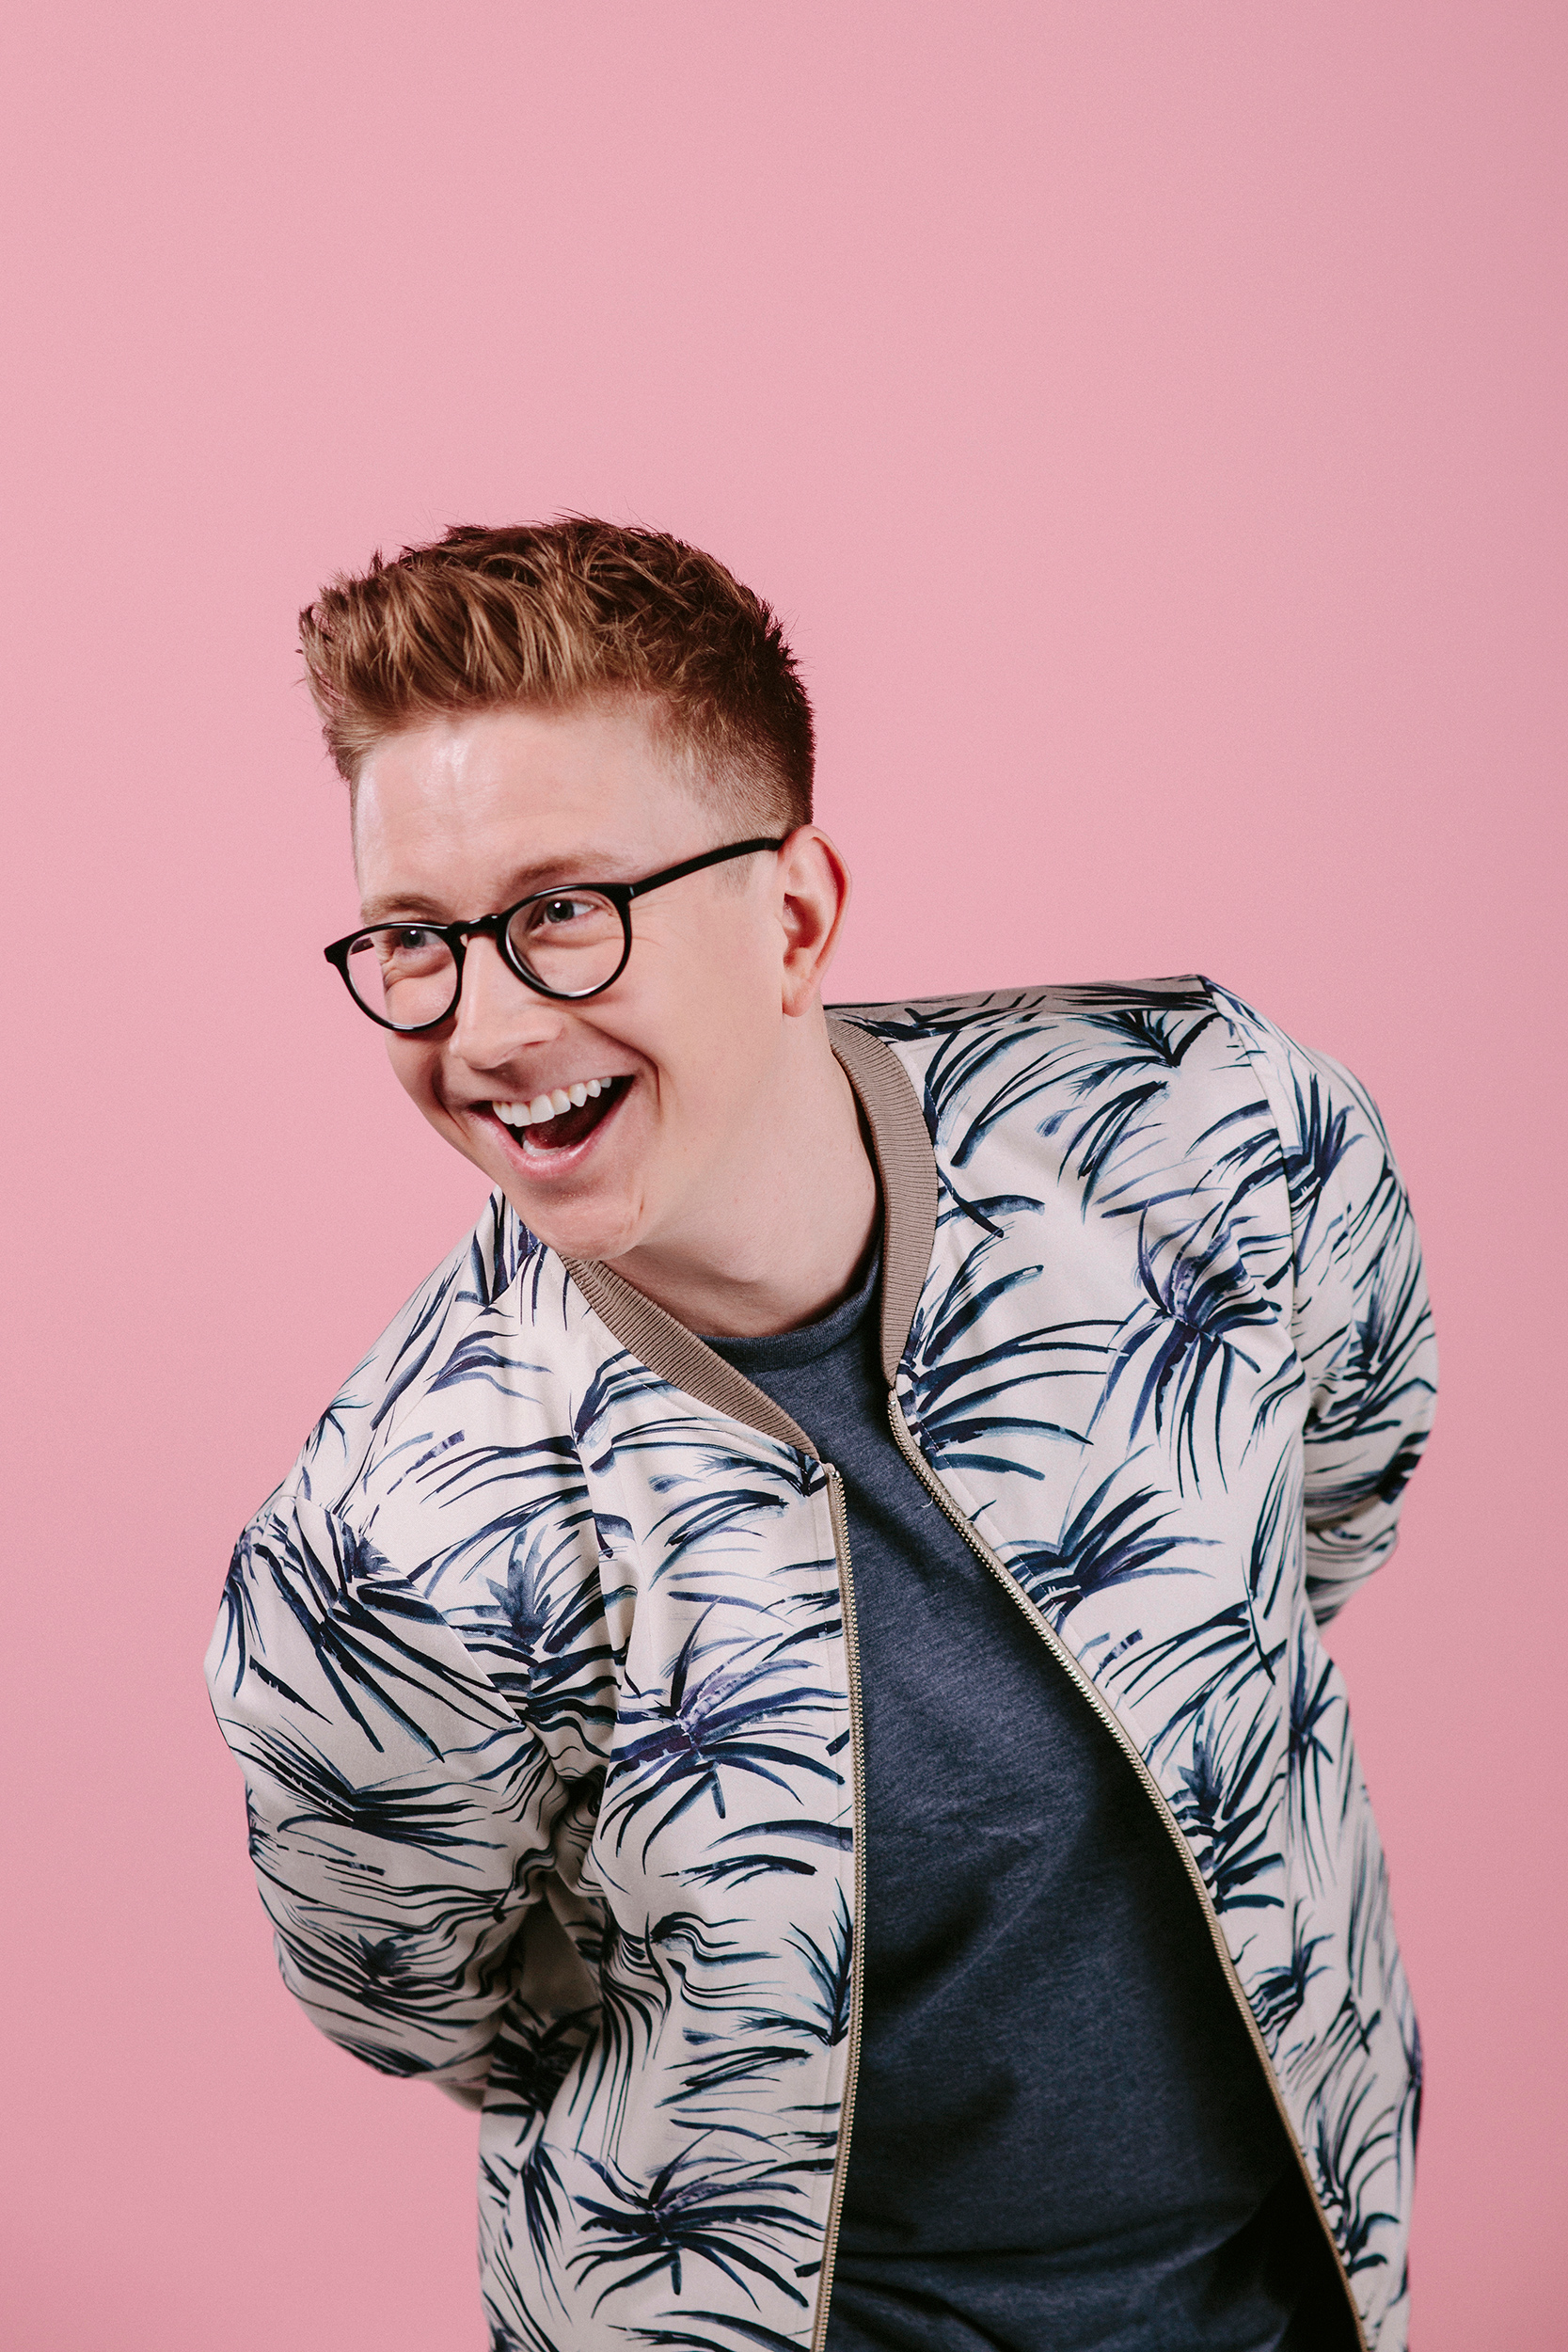 Tyler Oakley photographed for Time in Los Angeles on Feb. 8, 2017. (Brinson+Banks for Time)